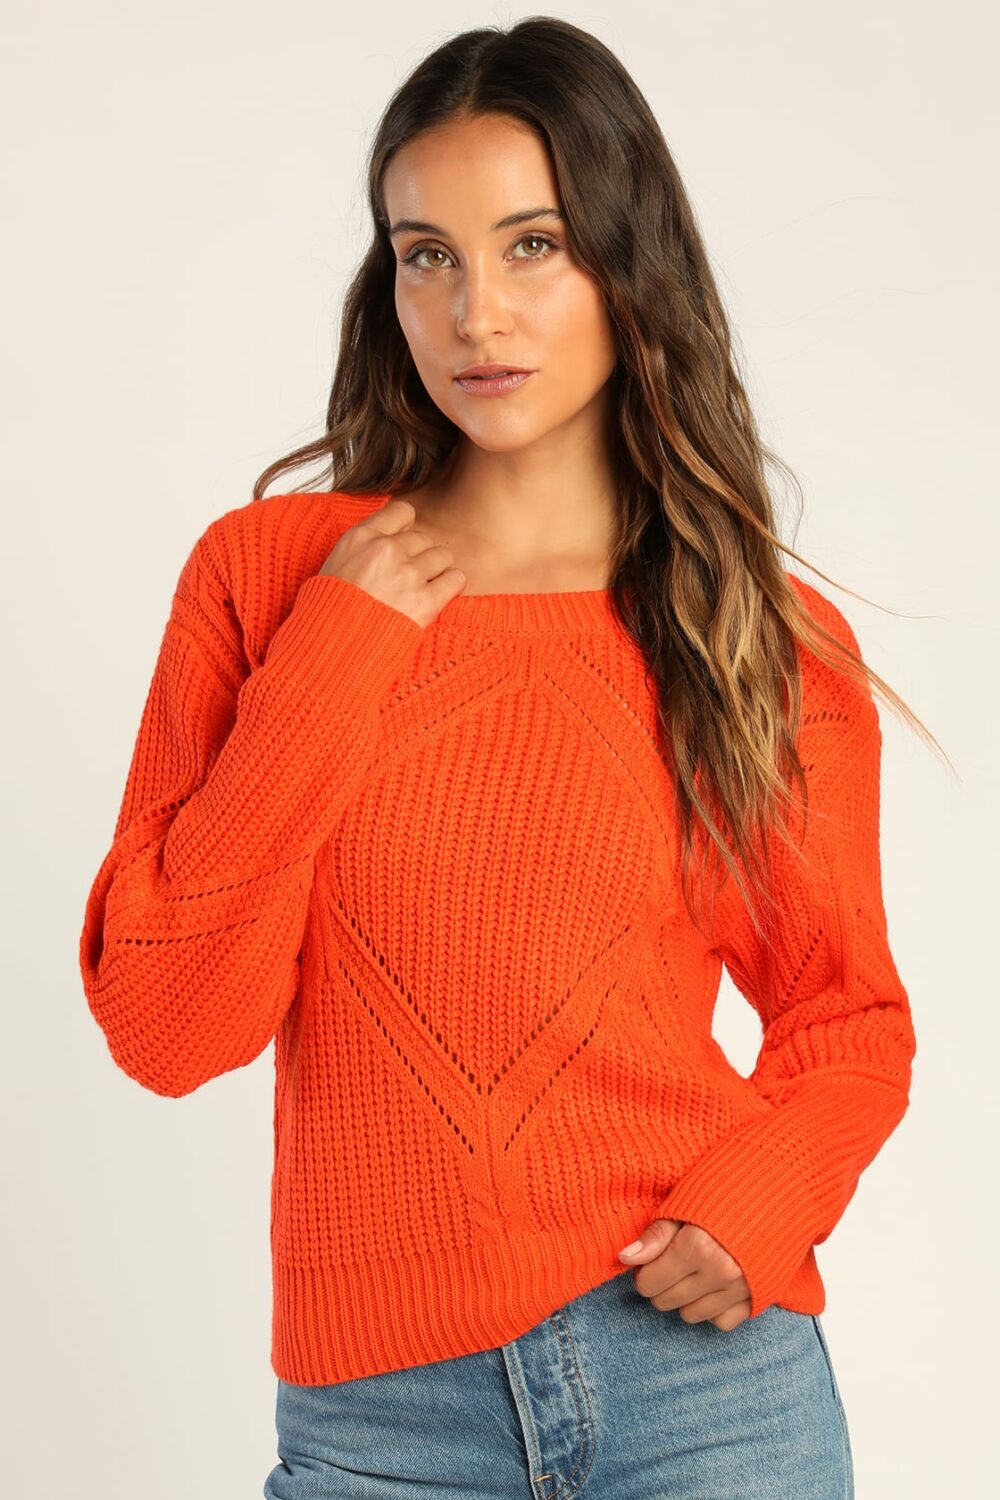 Bright Orange Long Sleeve Pullover Sweater with ribbed cuffs diamond shaped pointelle pattern can help you transition your wardrobe from summer to fall without sacrificing everyday cuteness